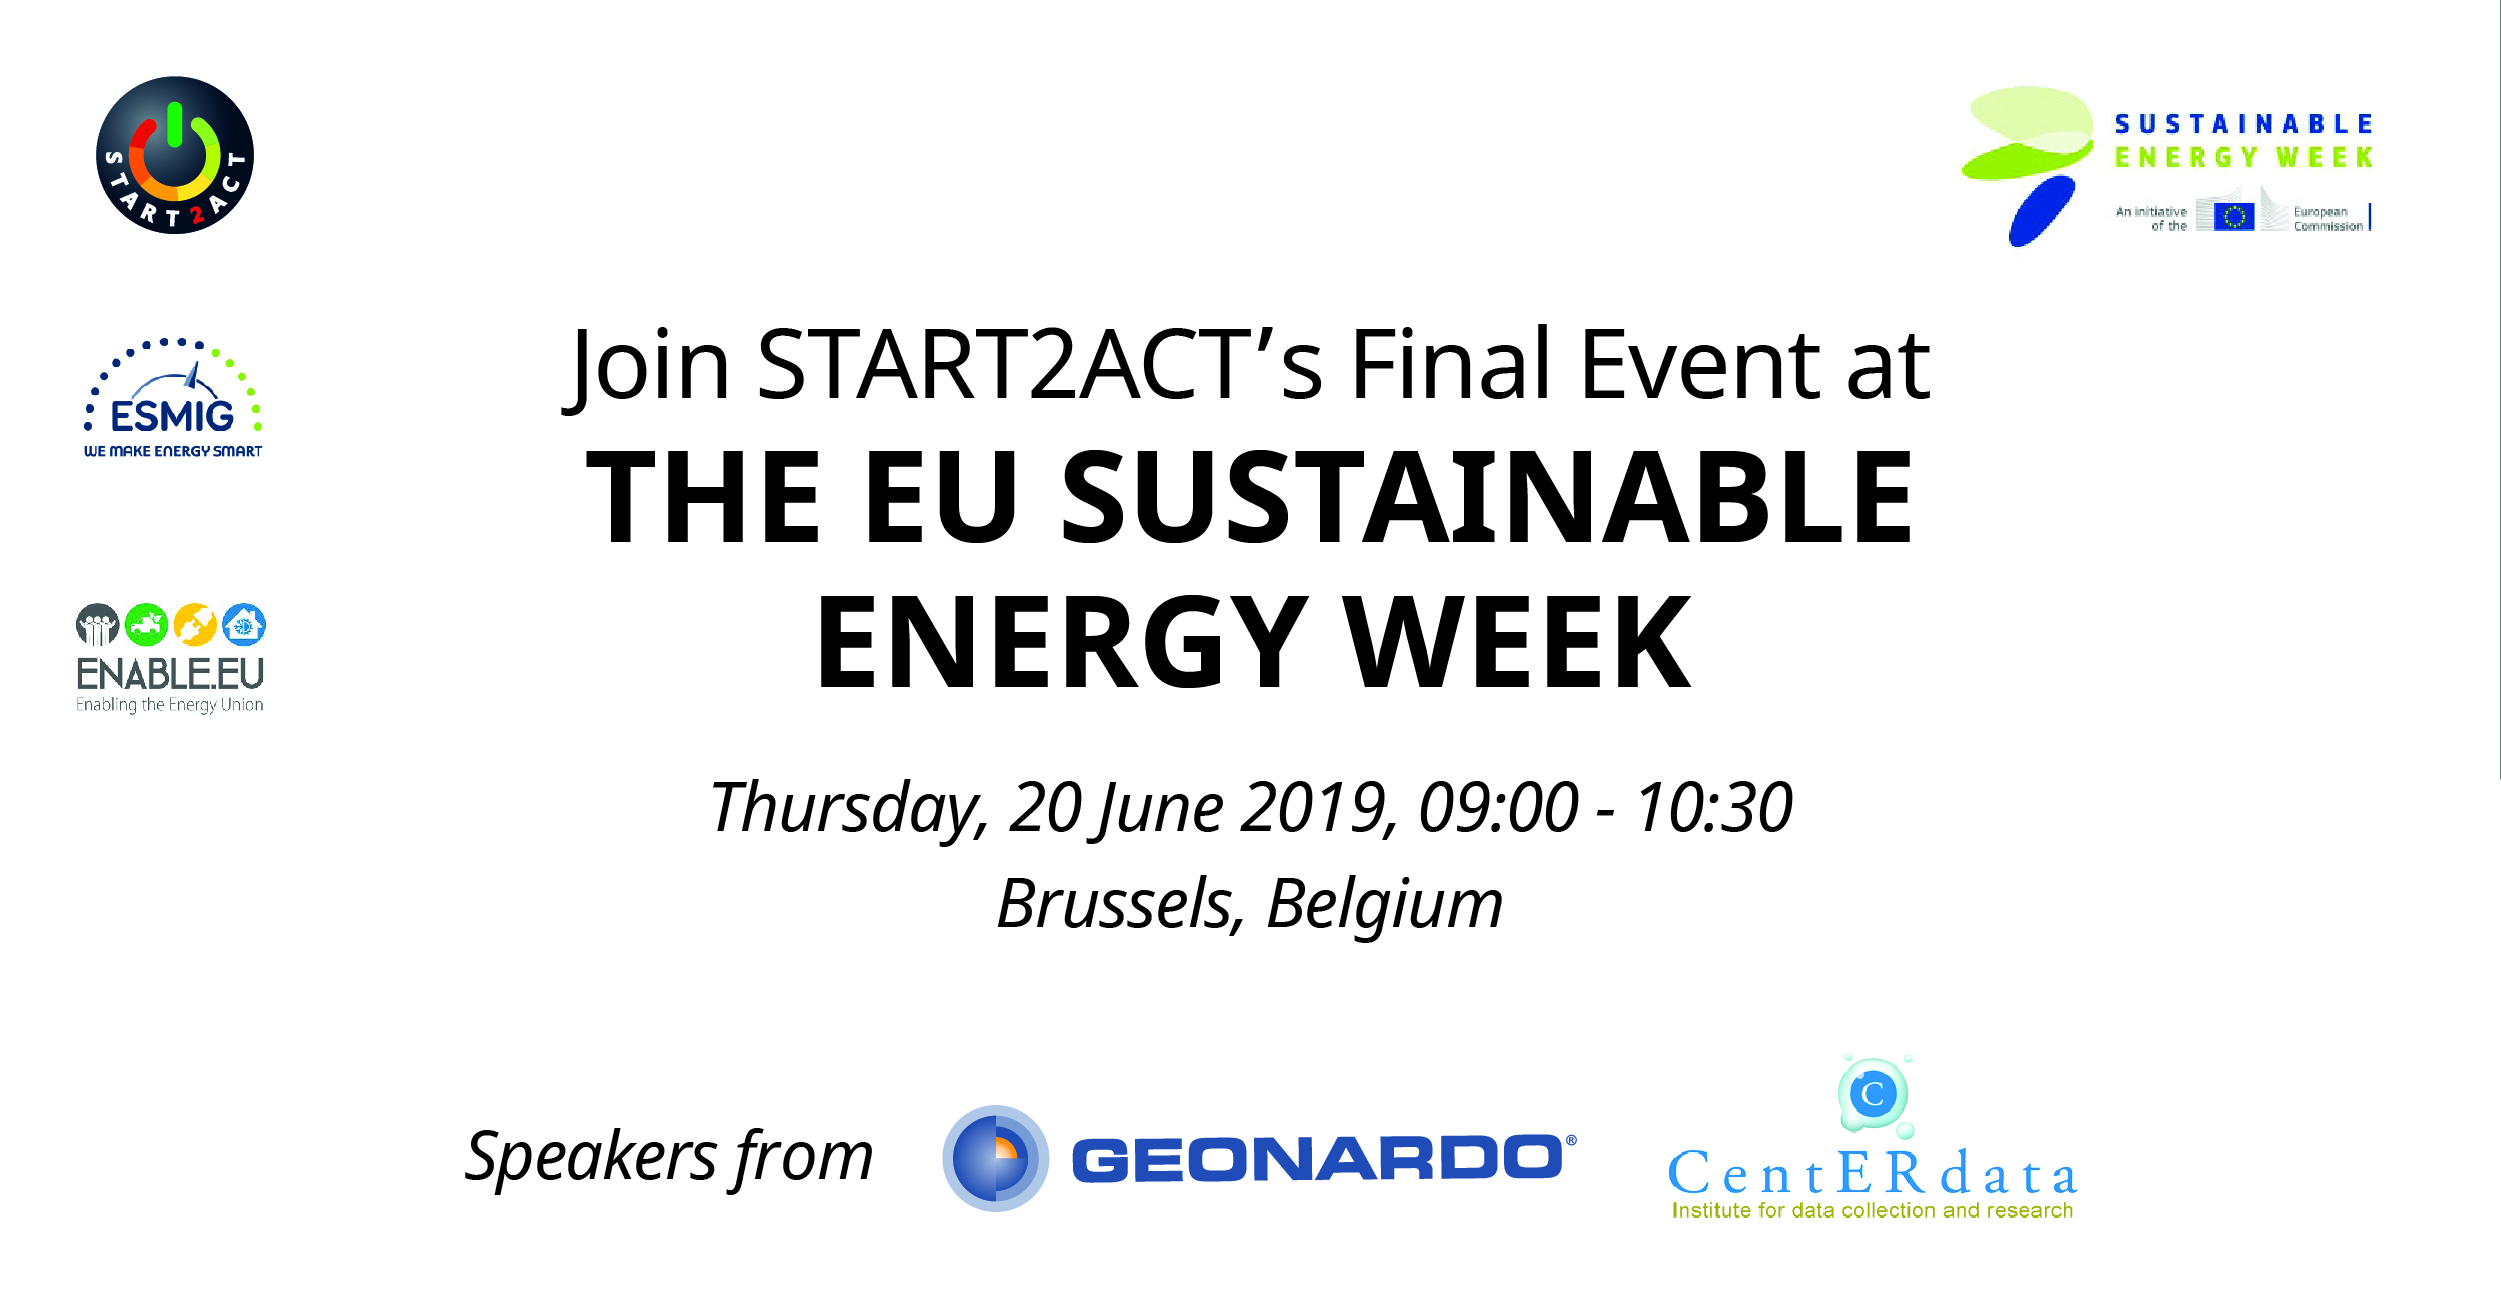 Join START2ACT's Final Event at the EU Sustainable Energy Week